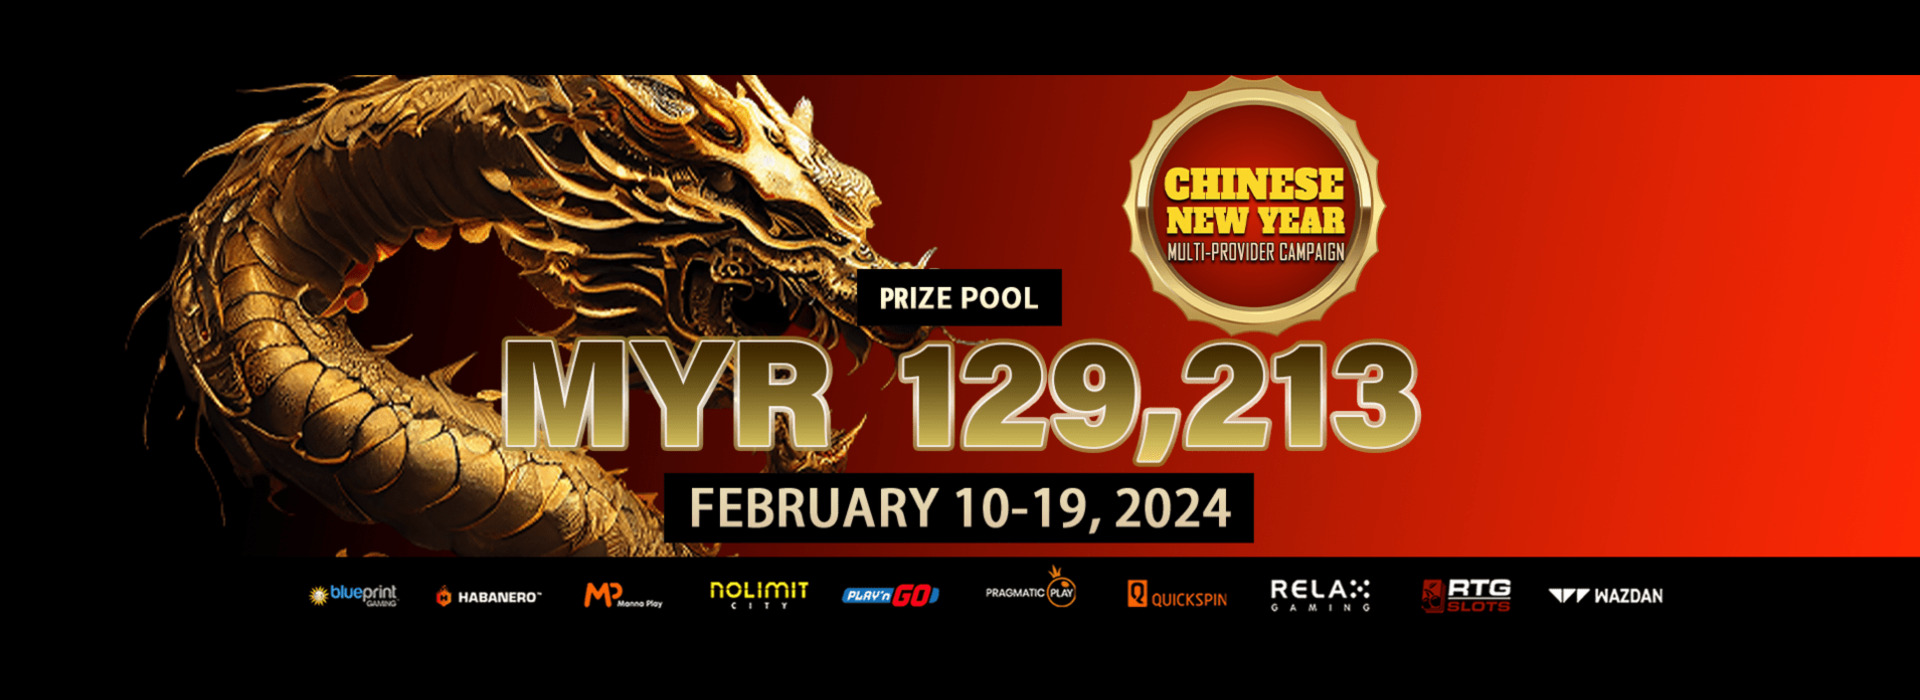 Chinese New Year Multi-Provider Campaign !! Unleash the dragon inside you!